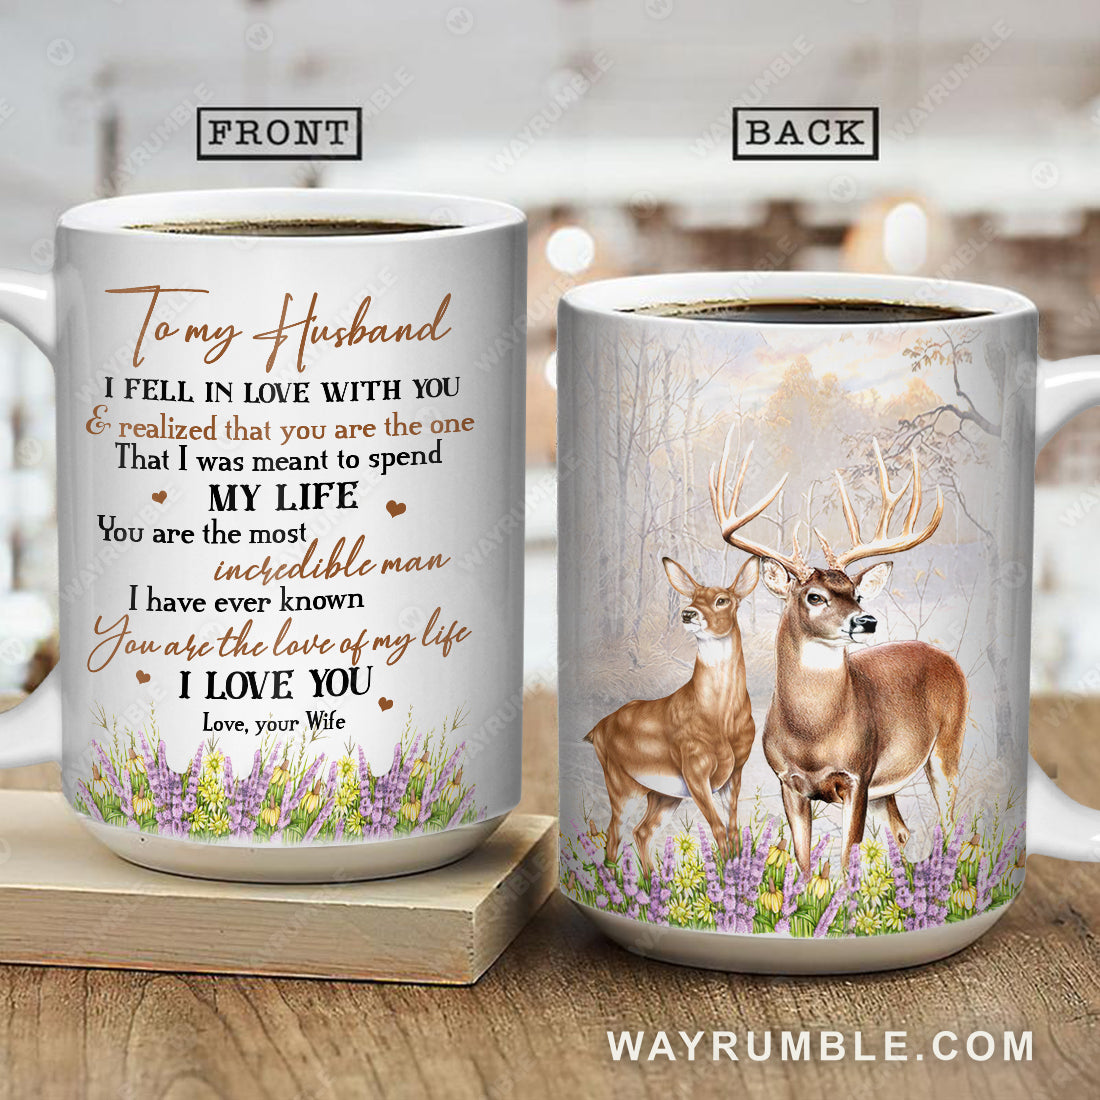 To my Husband, Dear couple, Flowerbed, You are the love of my life - Couple AOP Mug